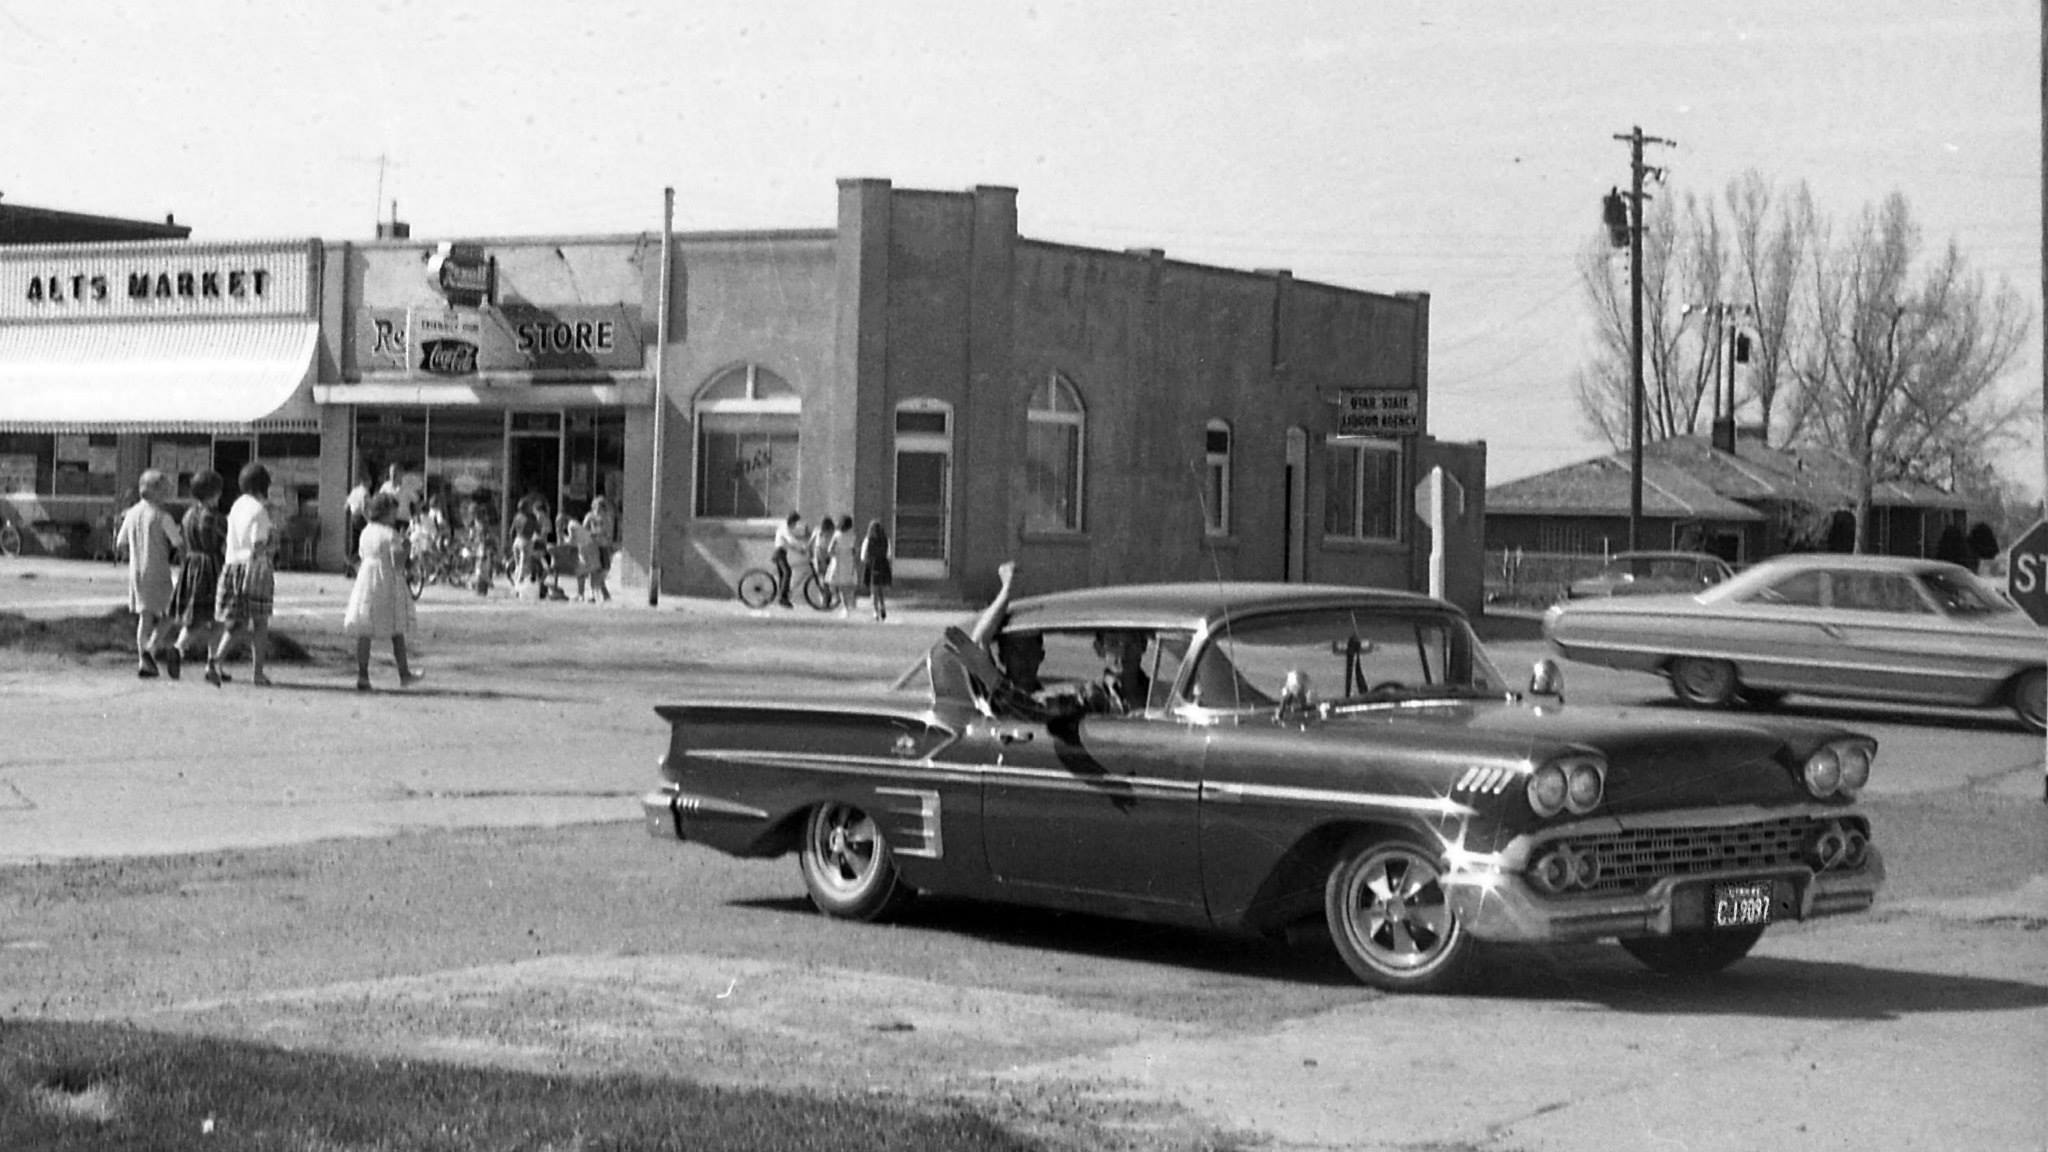 Wellsville Downtown approximately 1965 view 2